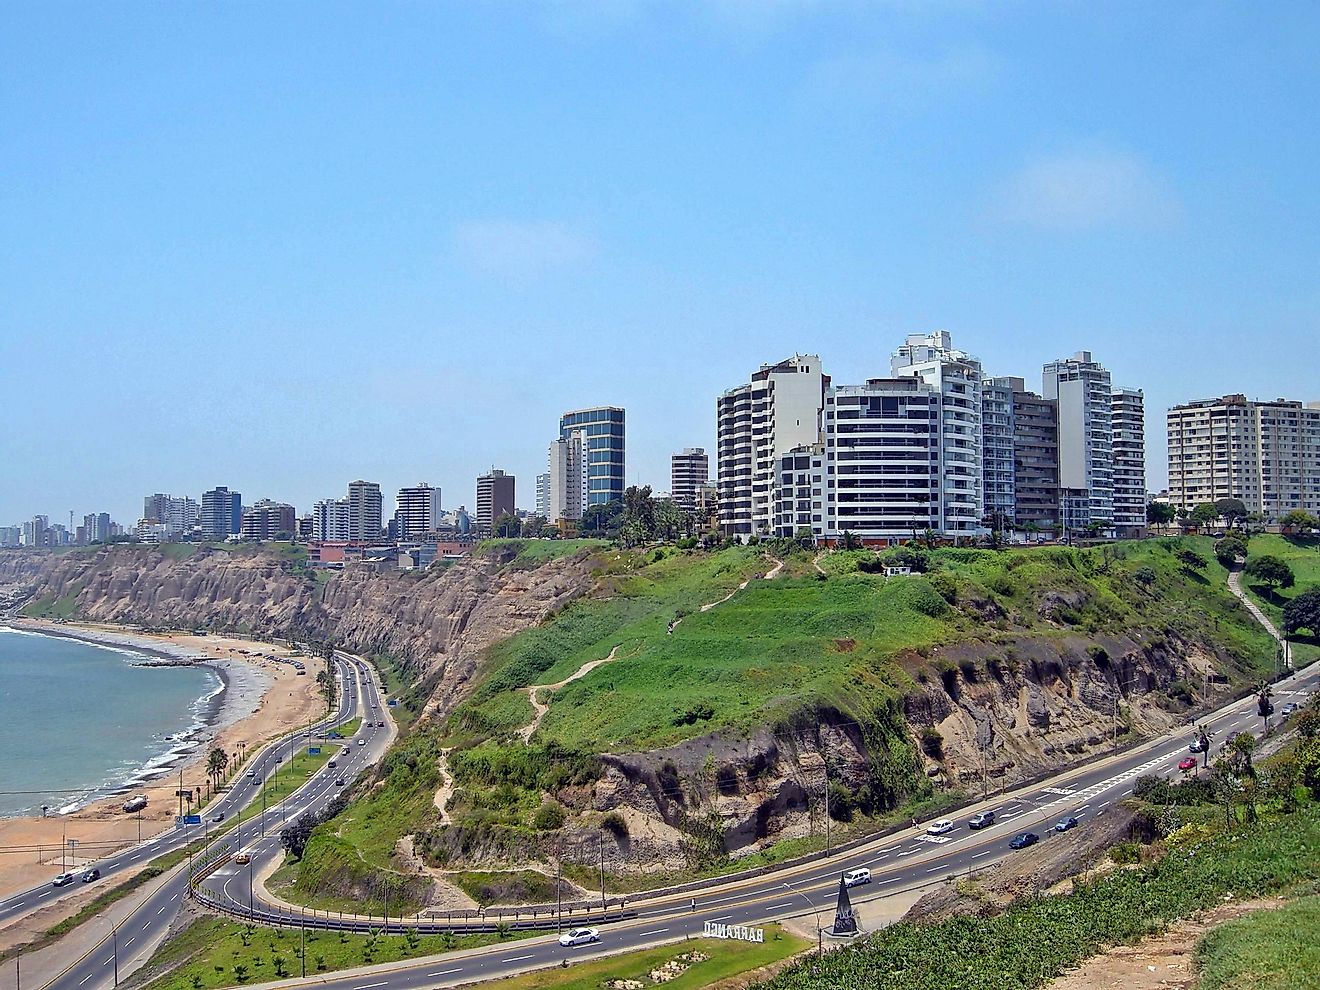 Lima, the capital city of Peru, is the most populated city in the country.